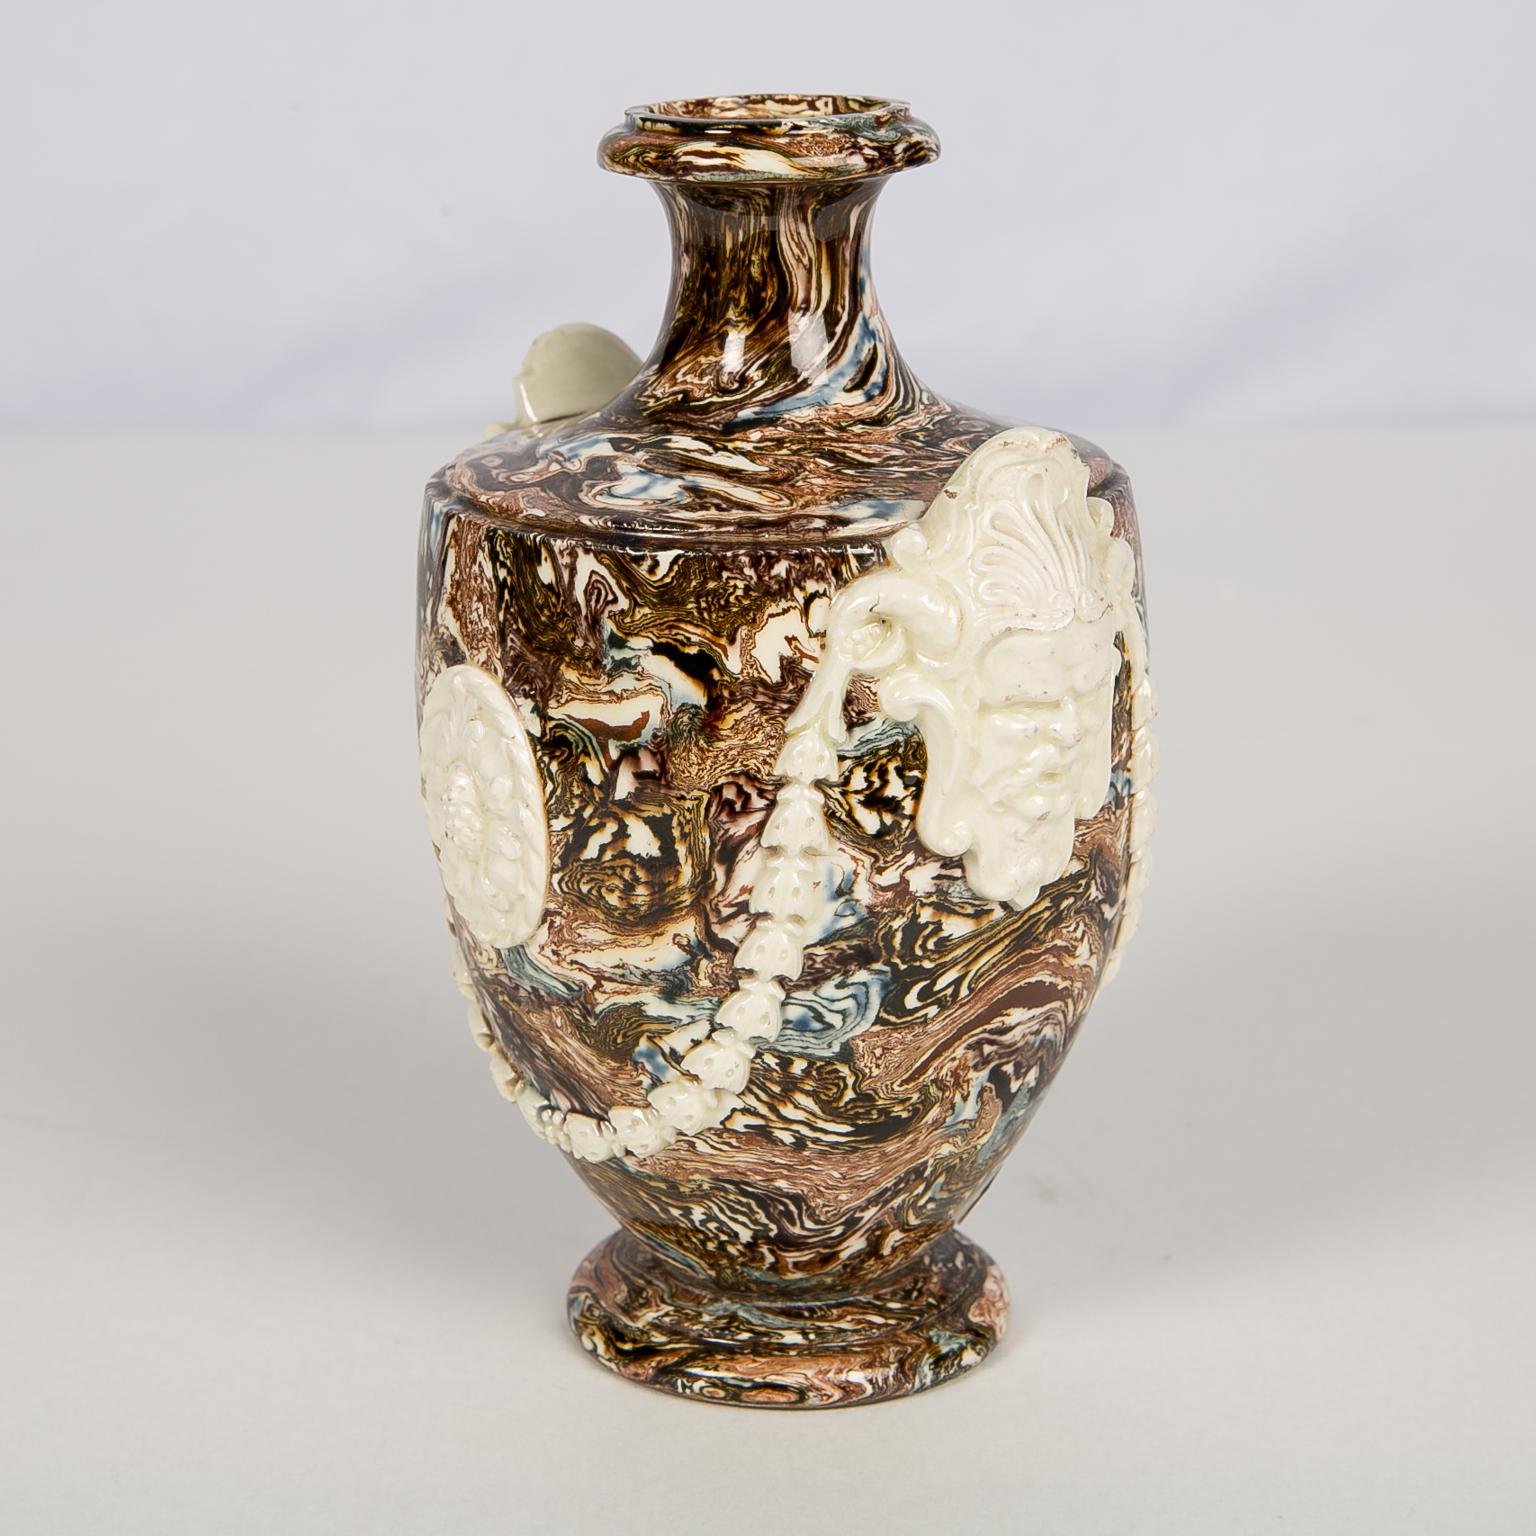 This 18th century small vase is a gem of solid agateware.  It was made of compositions of pigment-infused clay that look as much like natural stone as the stone itselfIt. The process involved wedging the colored clays together to form a solid agate